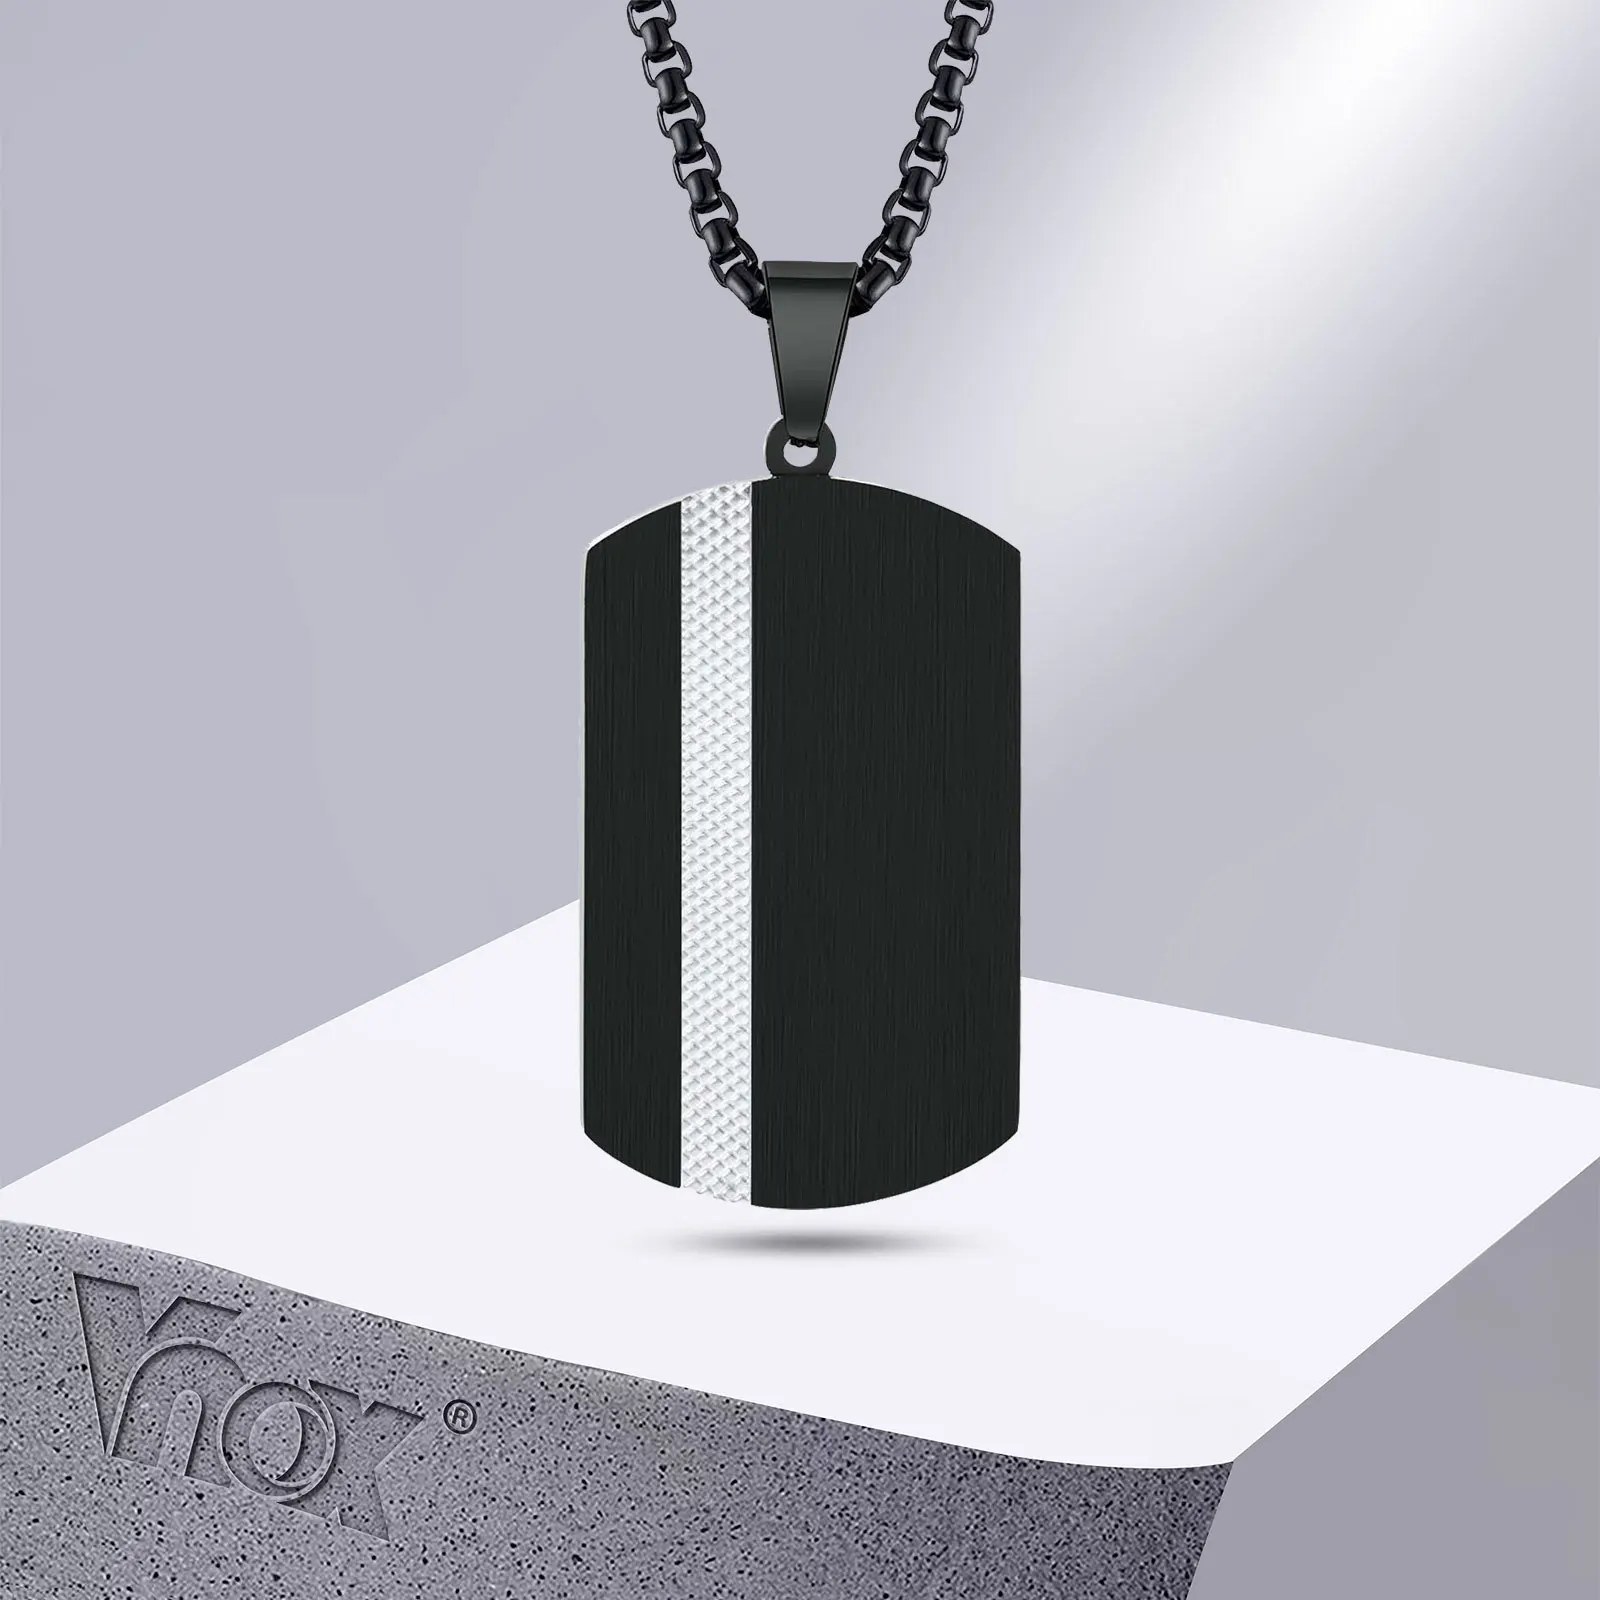 2x Mens Dog Tag Necklace Pendant Black Silver, Handmade Jewelry for Men,  Stainless Steel Chain Necklace for Him, Unique Gifts for Men 